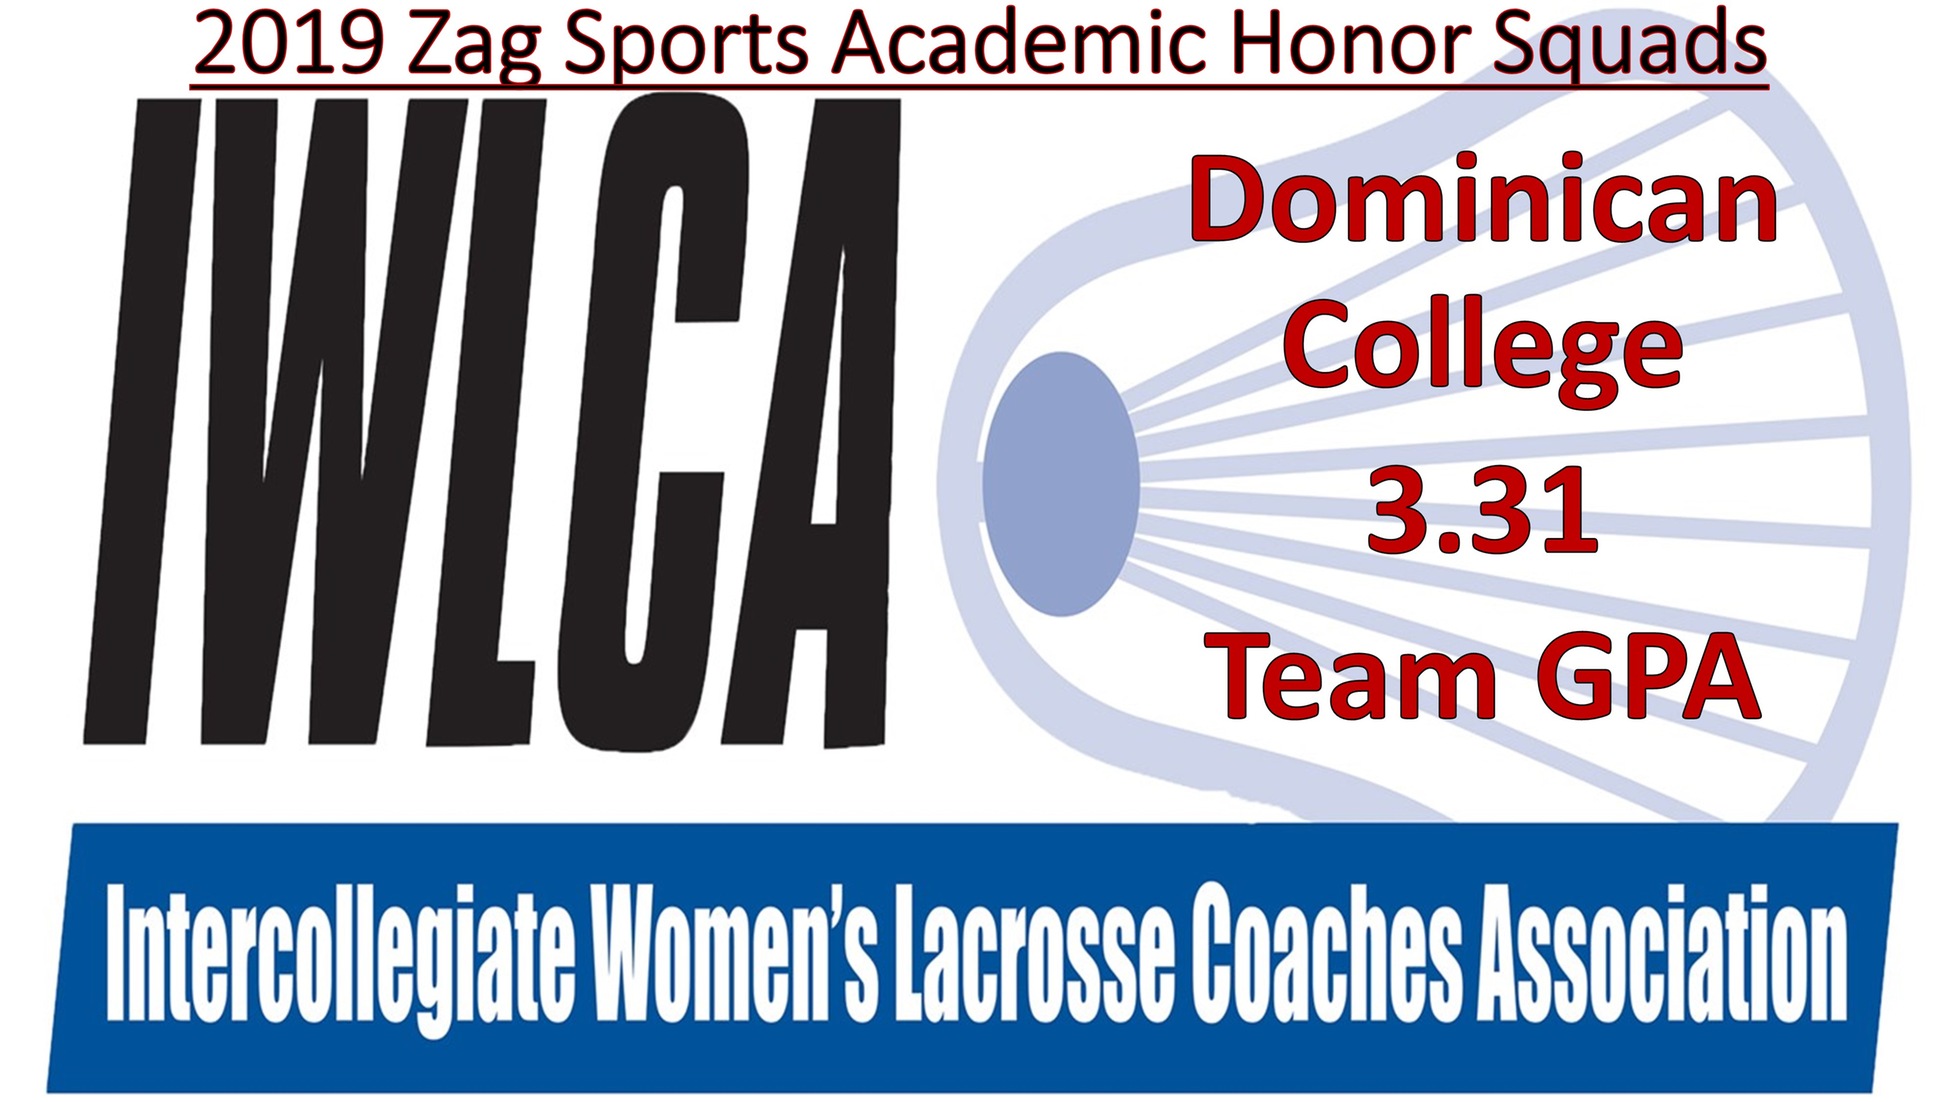 WOMEN'S LACROSSE NAMED TO 2019 ZAG SPORTS ACADEMIC HONOR SQUADS